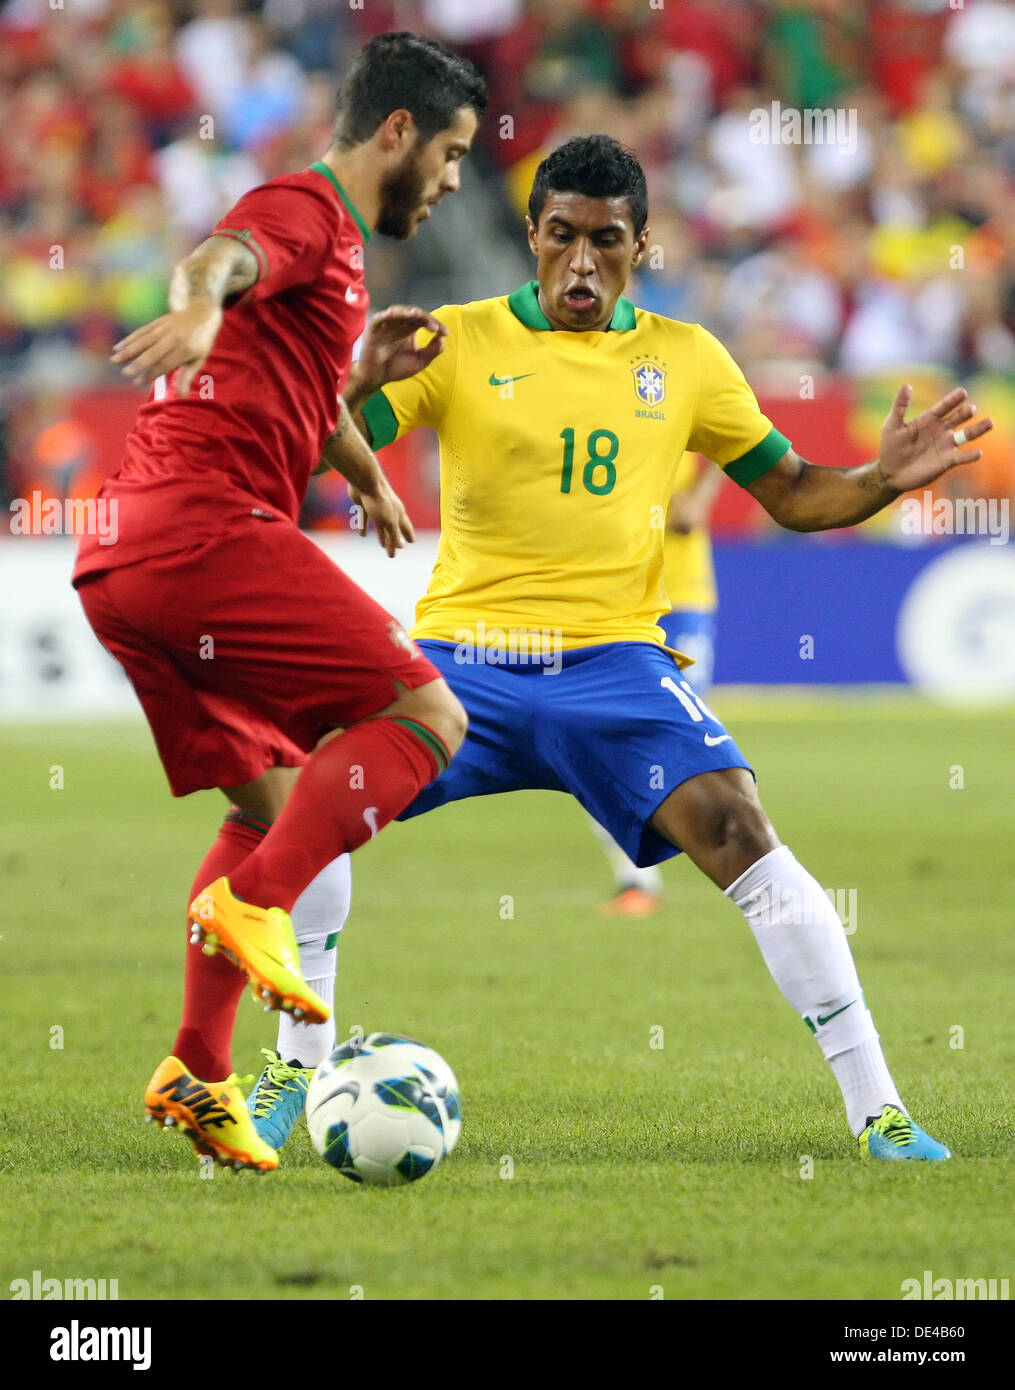 Foxborough, Massachusetts, USA. 11th Sep, 2013. September 10, 2013: Portugal forward Vieirinha (11) and Brazil midfielder Paulinho (18) in action during the international friendly soccer match between Brazil and Portugal at Gillette Stadium in Foxborough, Massachusetts. Brazil defeated Portugal 3-1. Anthony Nesmith/CSM/Alamy Live News Stock Photo